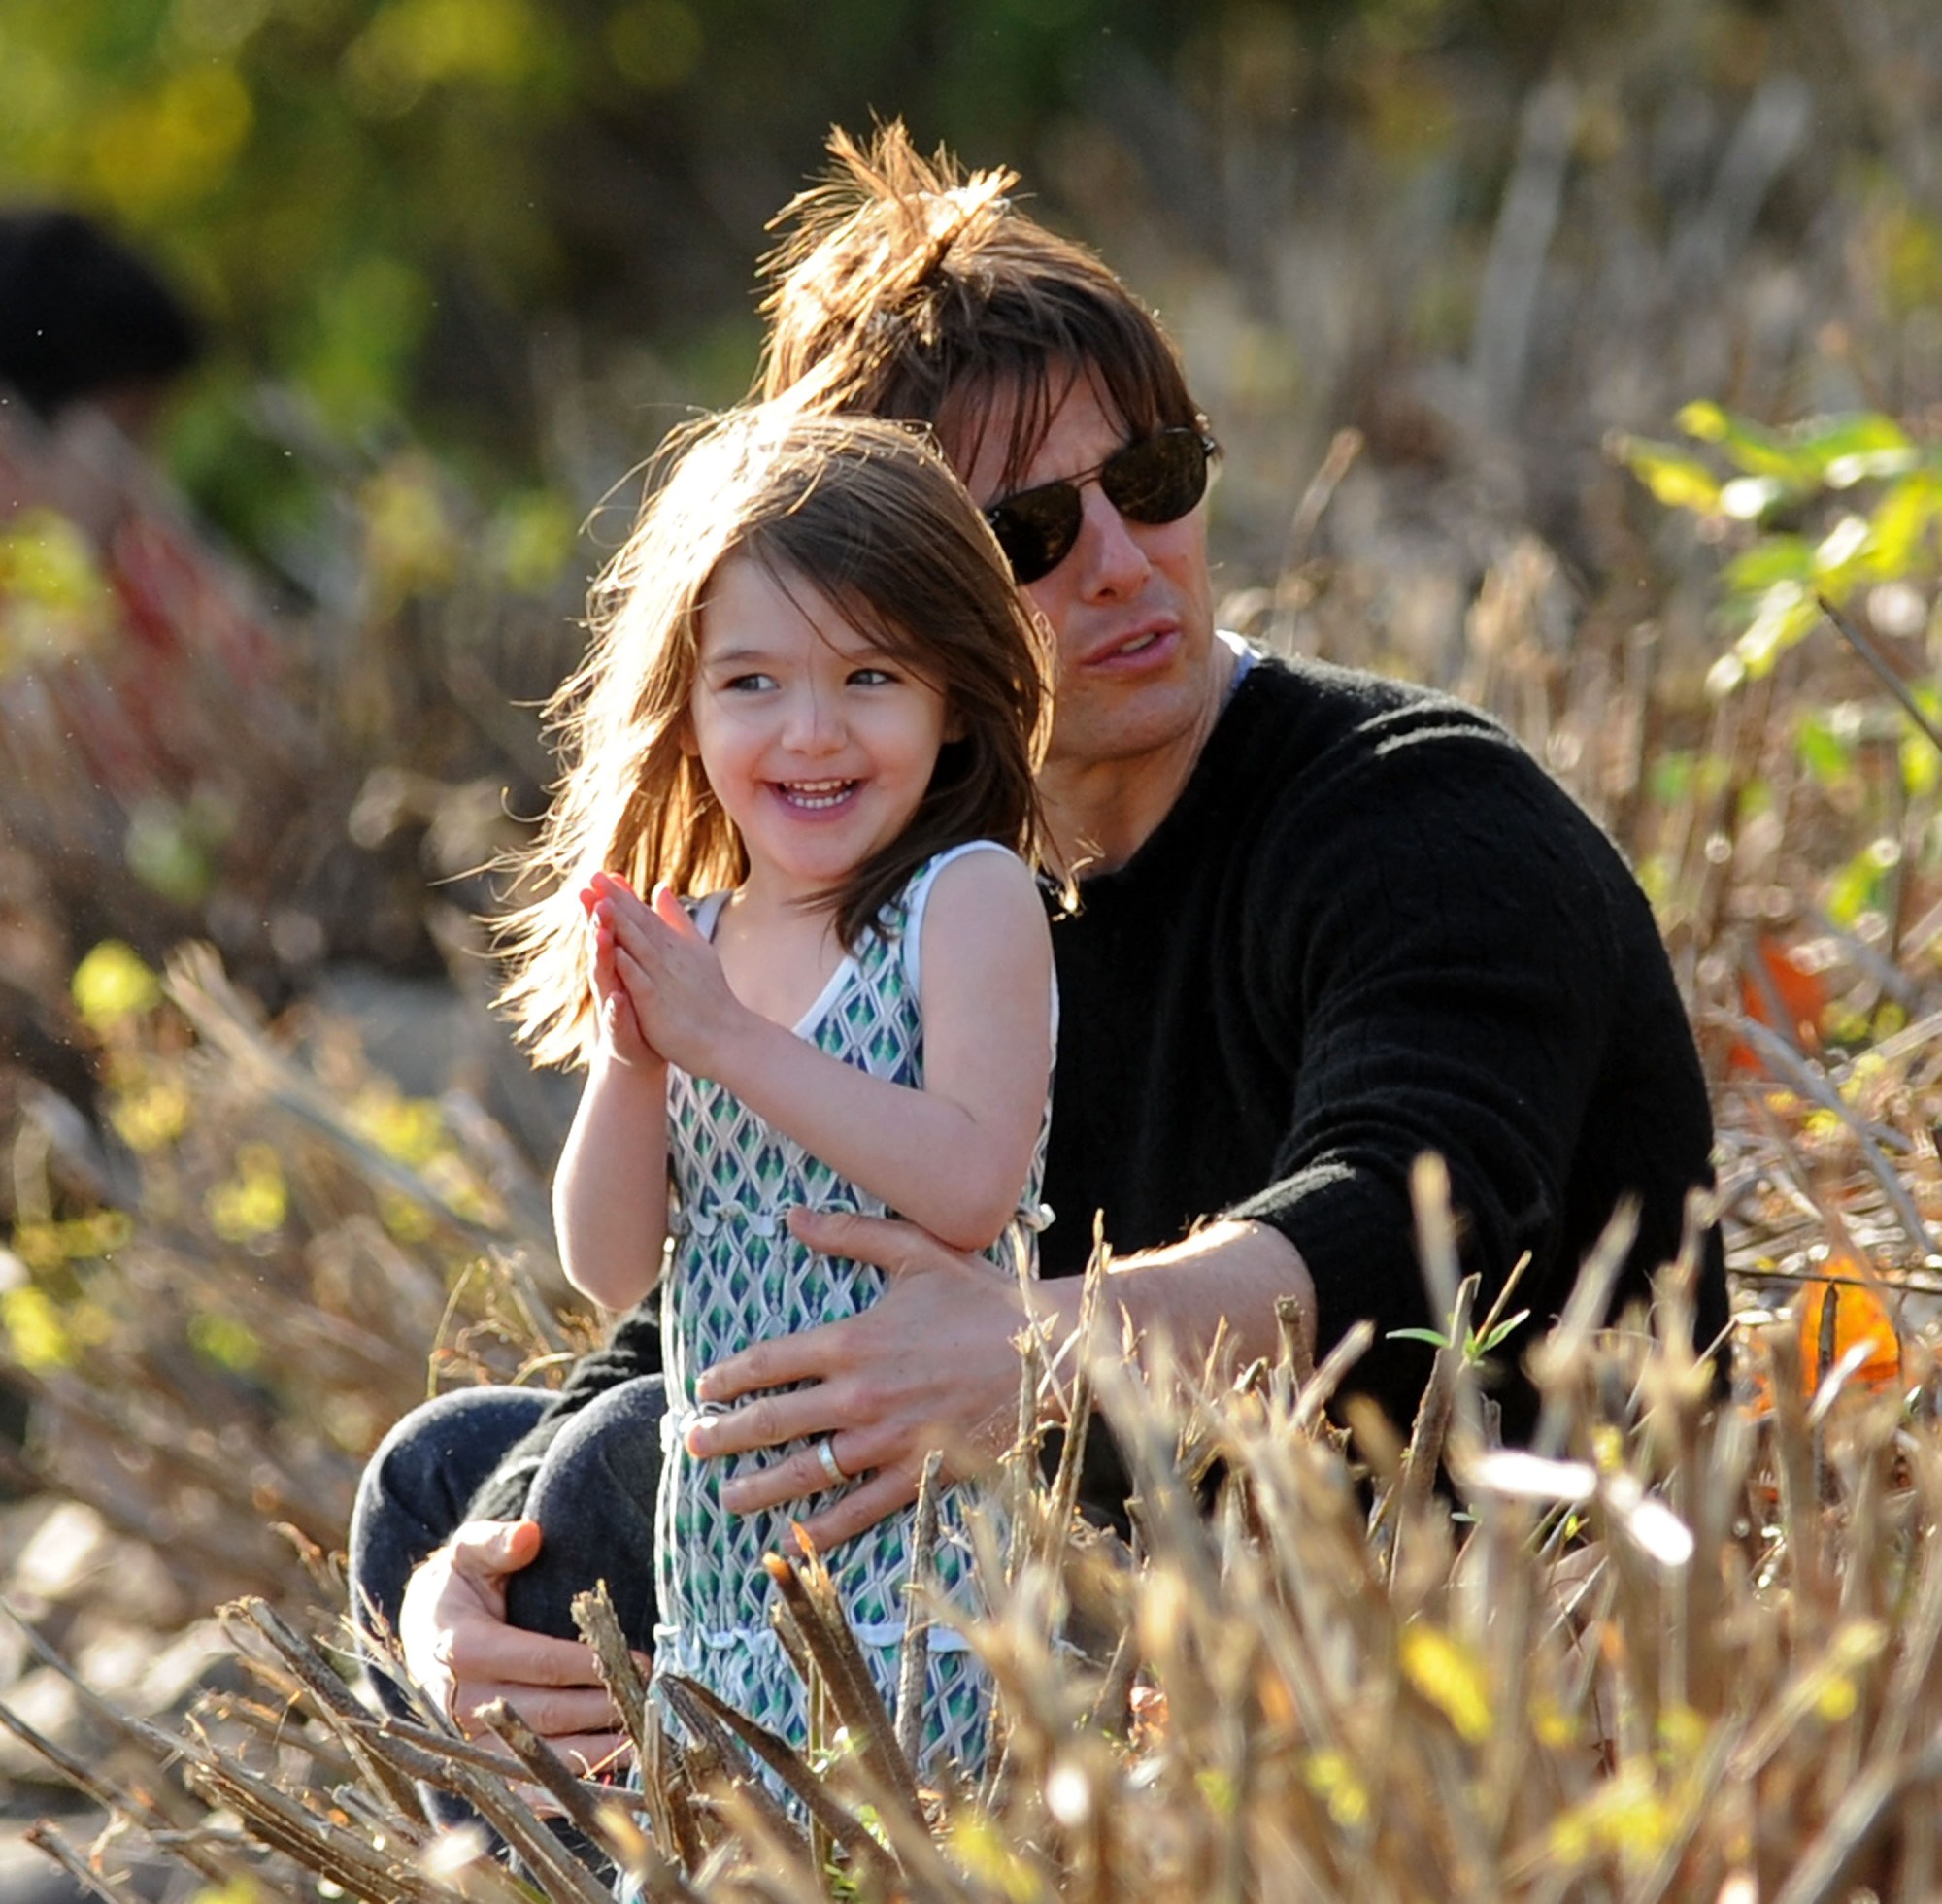 tom cruise is daughter